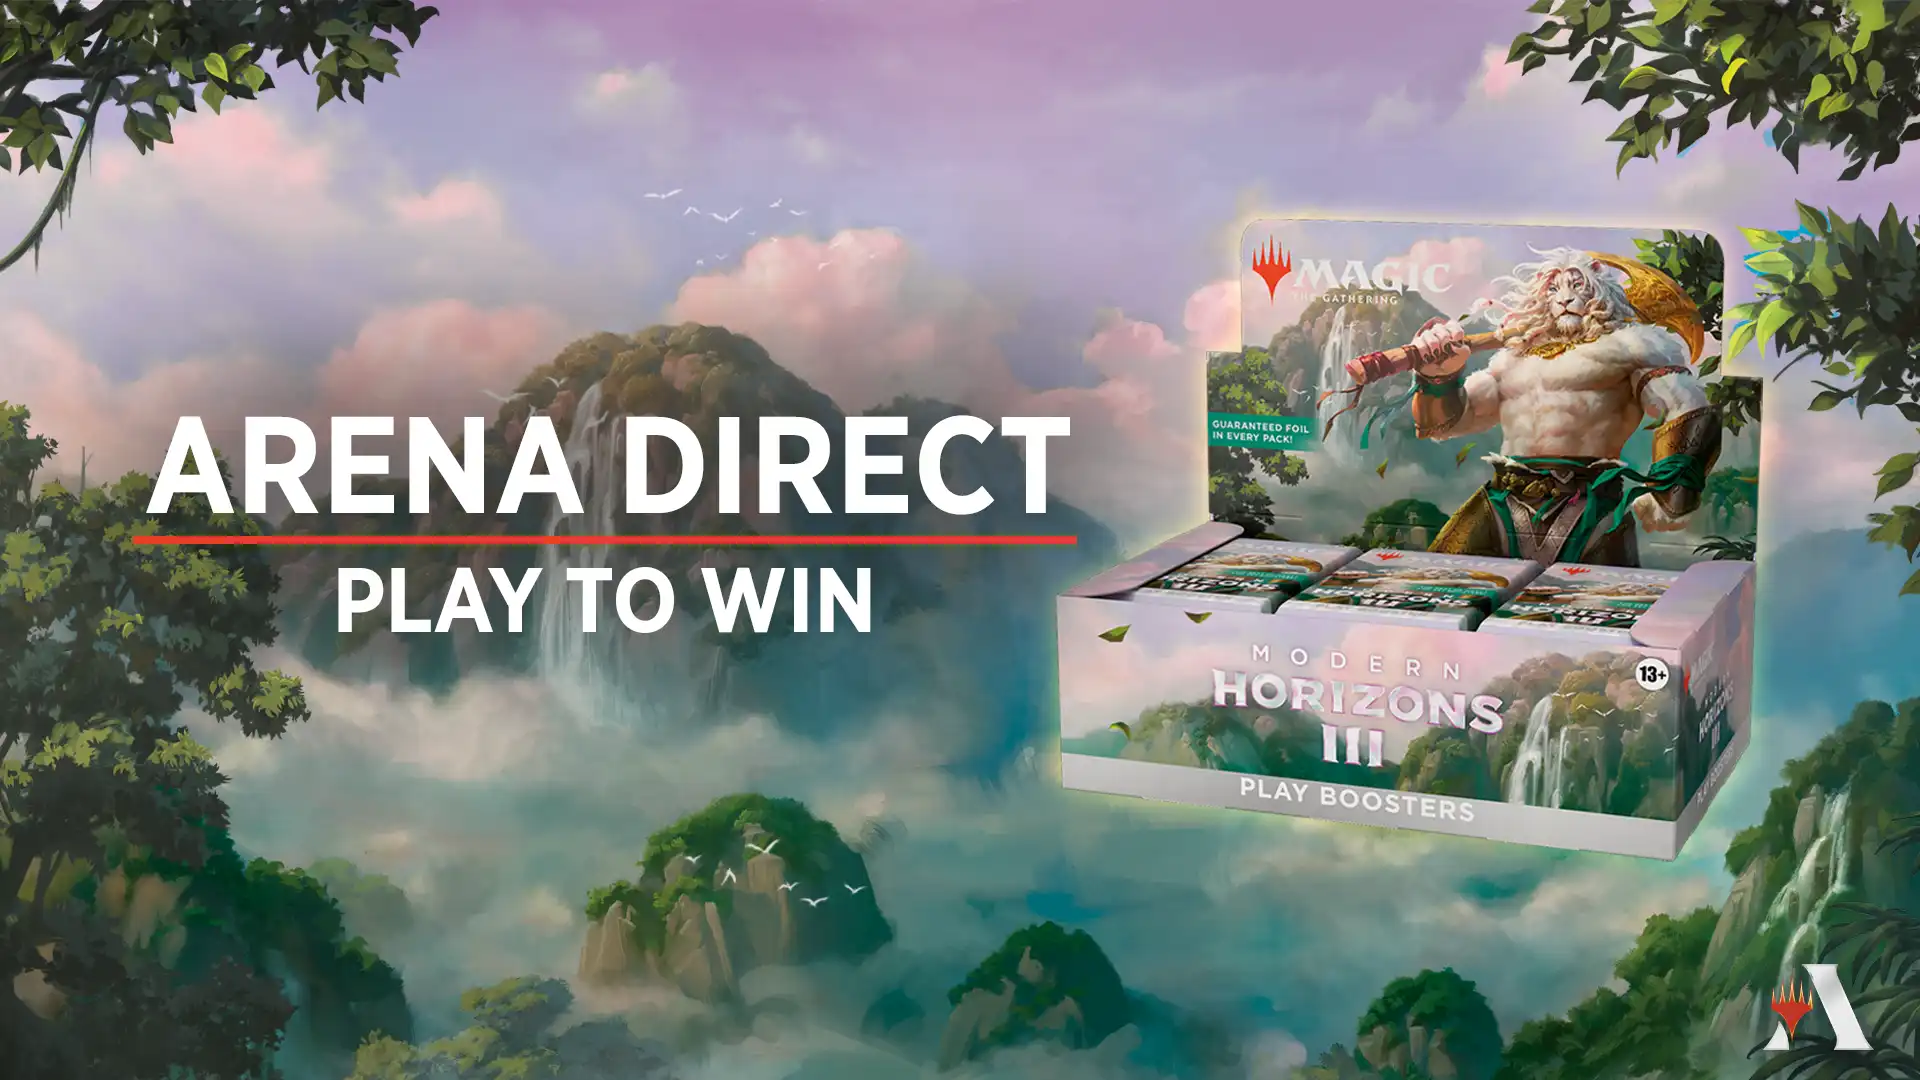 Win physical Magic cards by winning in MTG Arena events—introducing Arena Direct